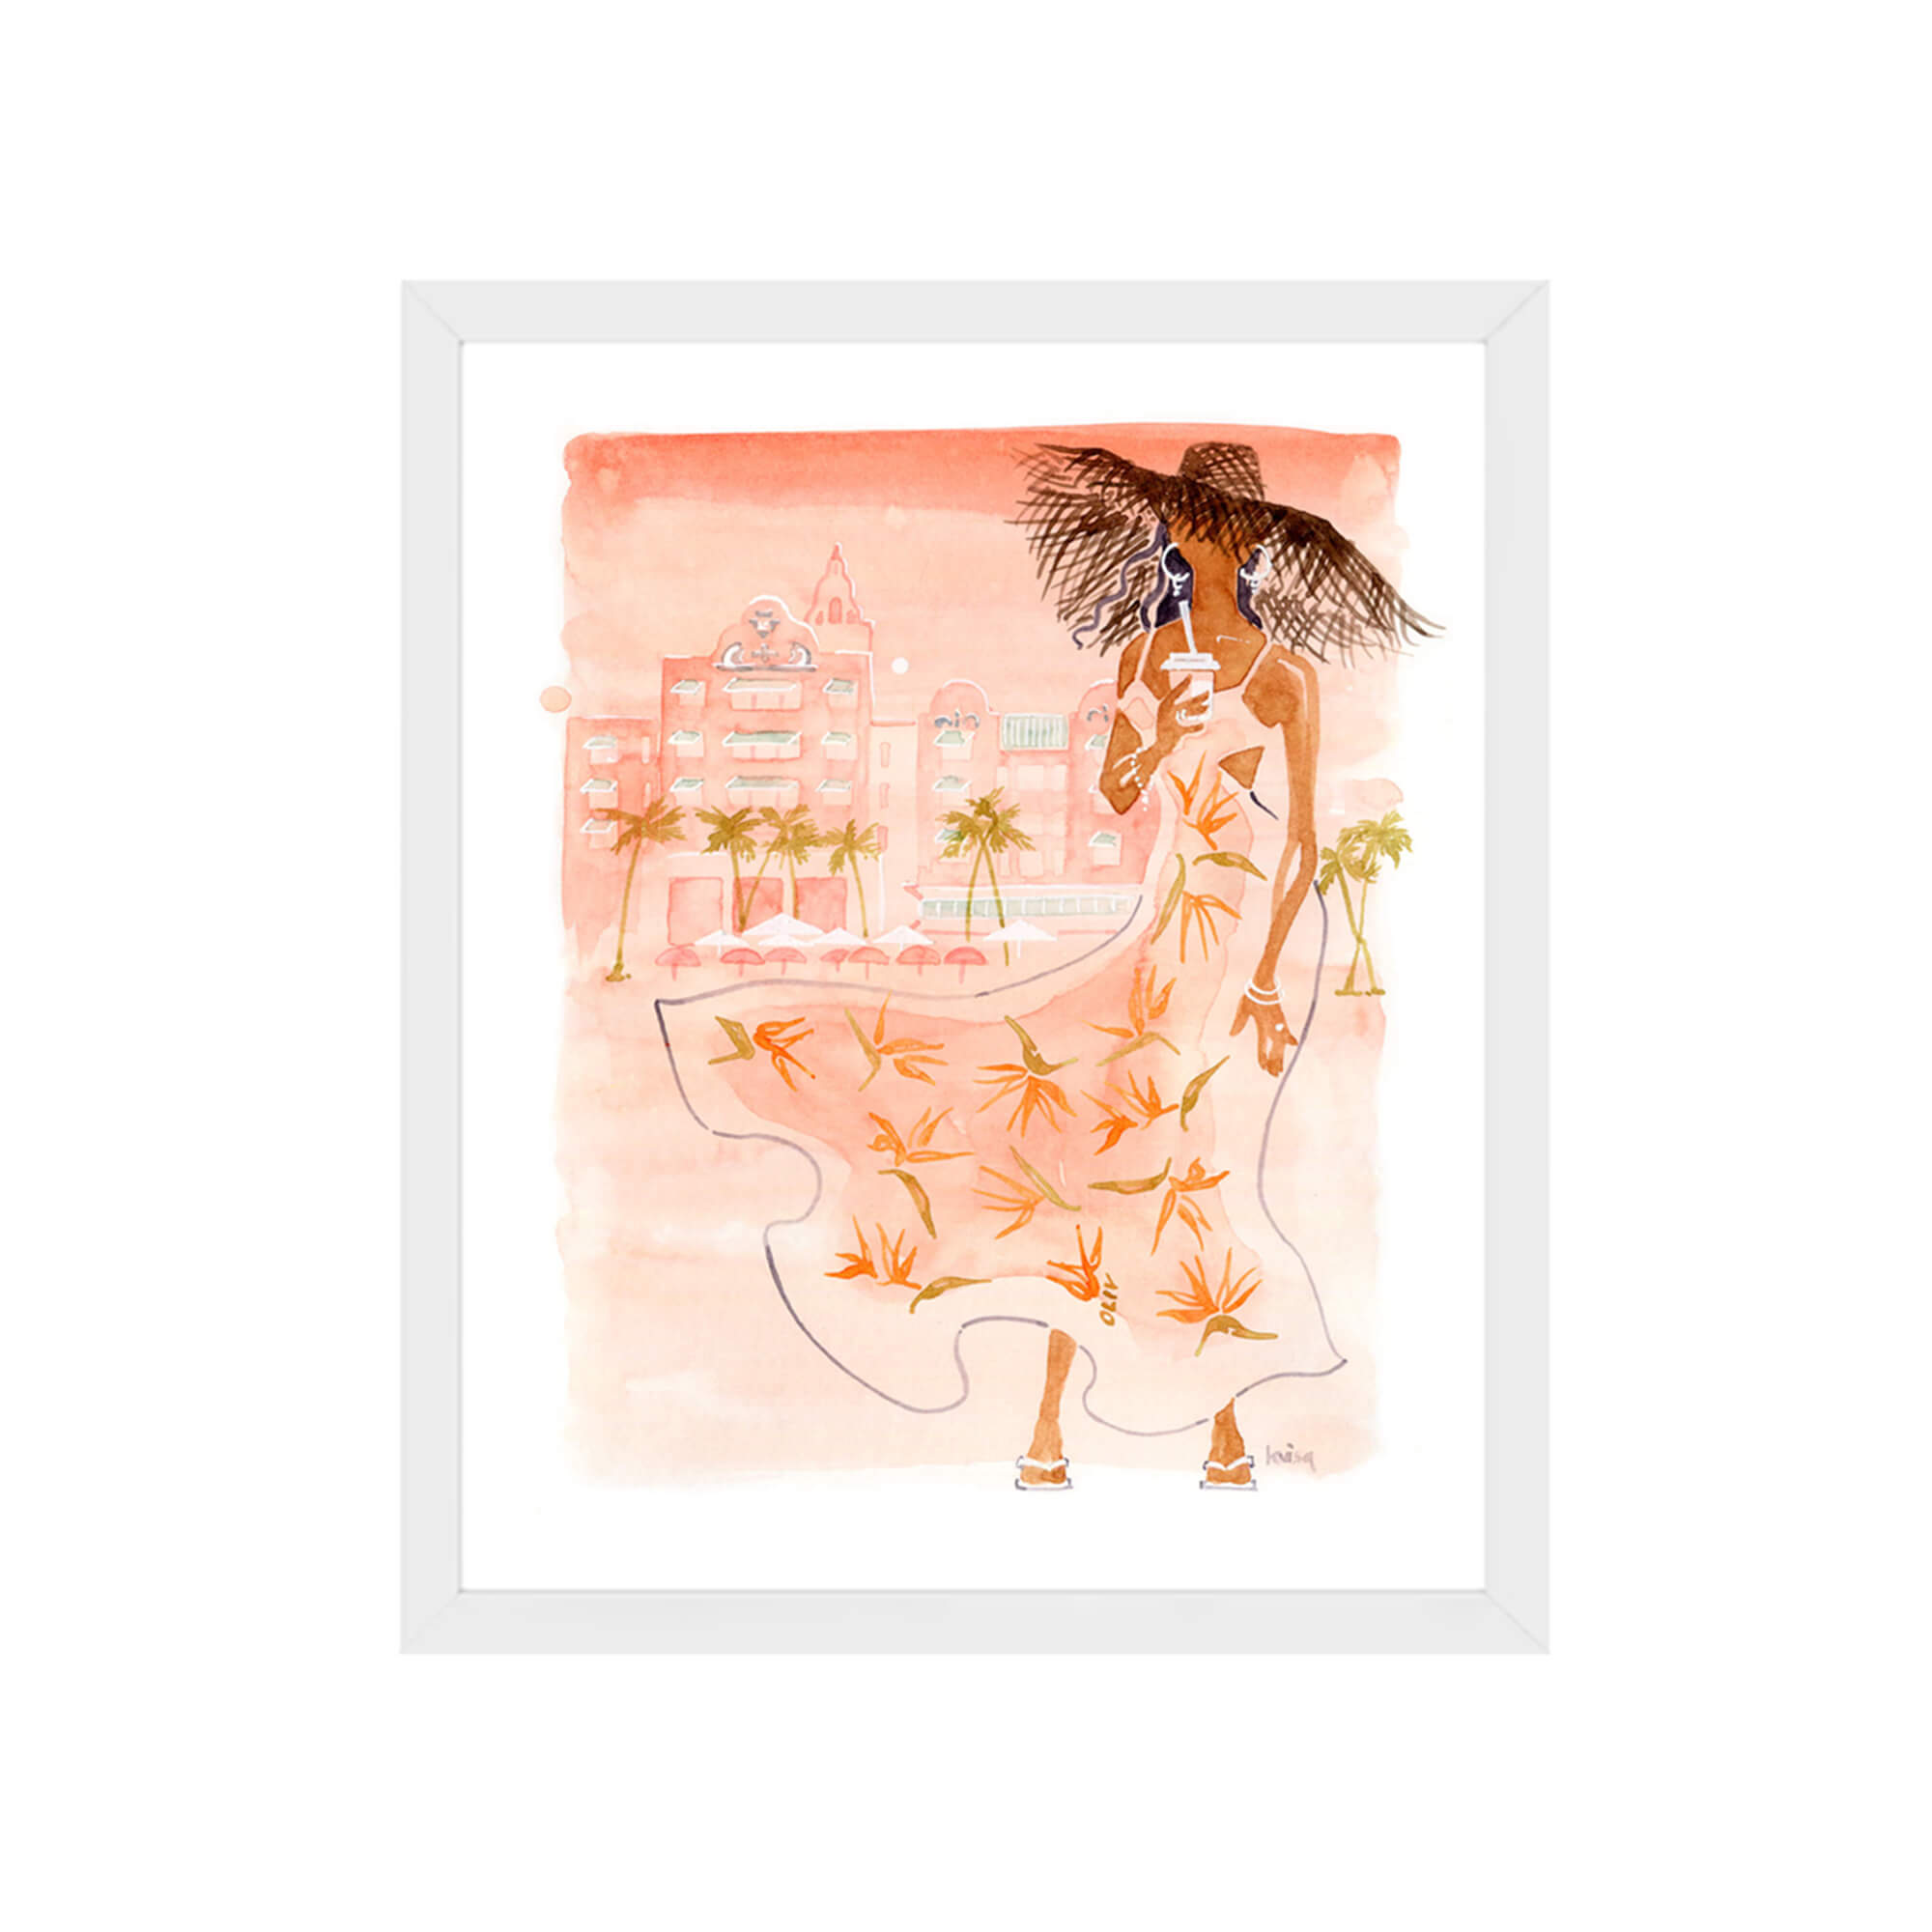 Framed paper giclée print of a watercolor artwork featuring a fashionable woman in front of Royal Hawaiian Hotel by Hawaii artist Lovisa Oliv